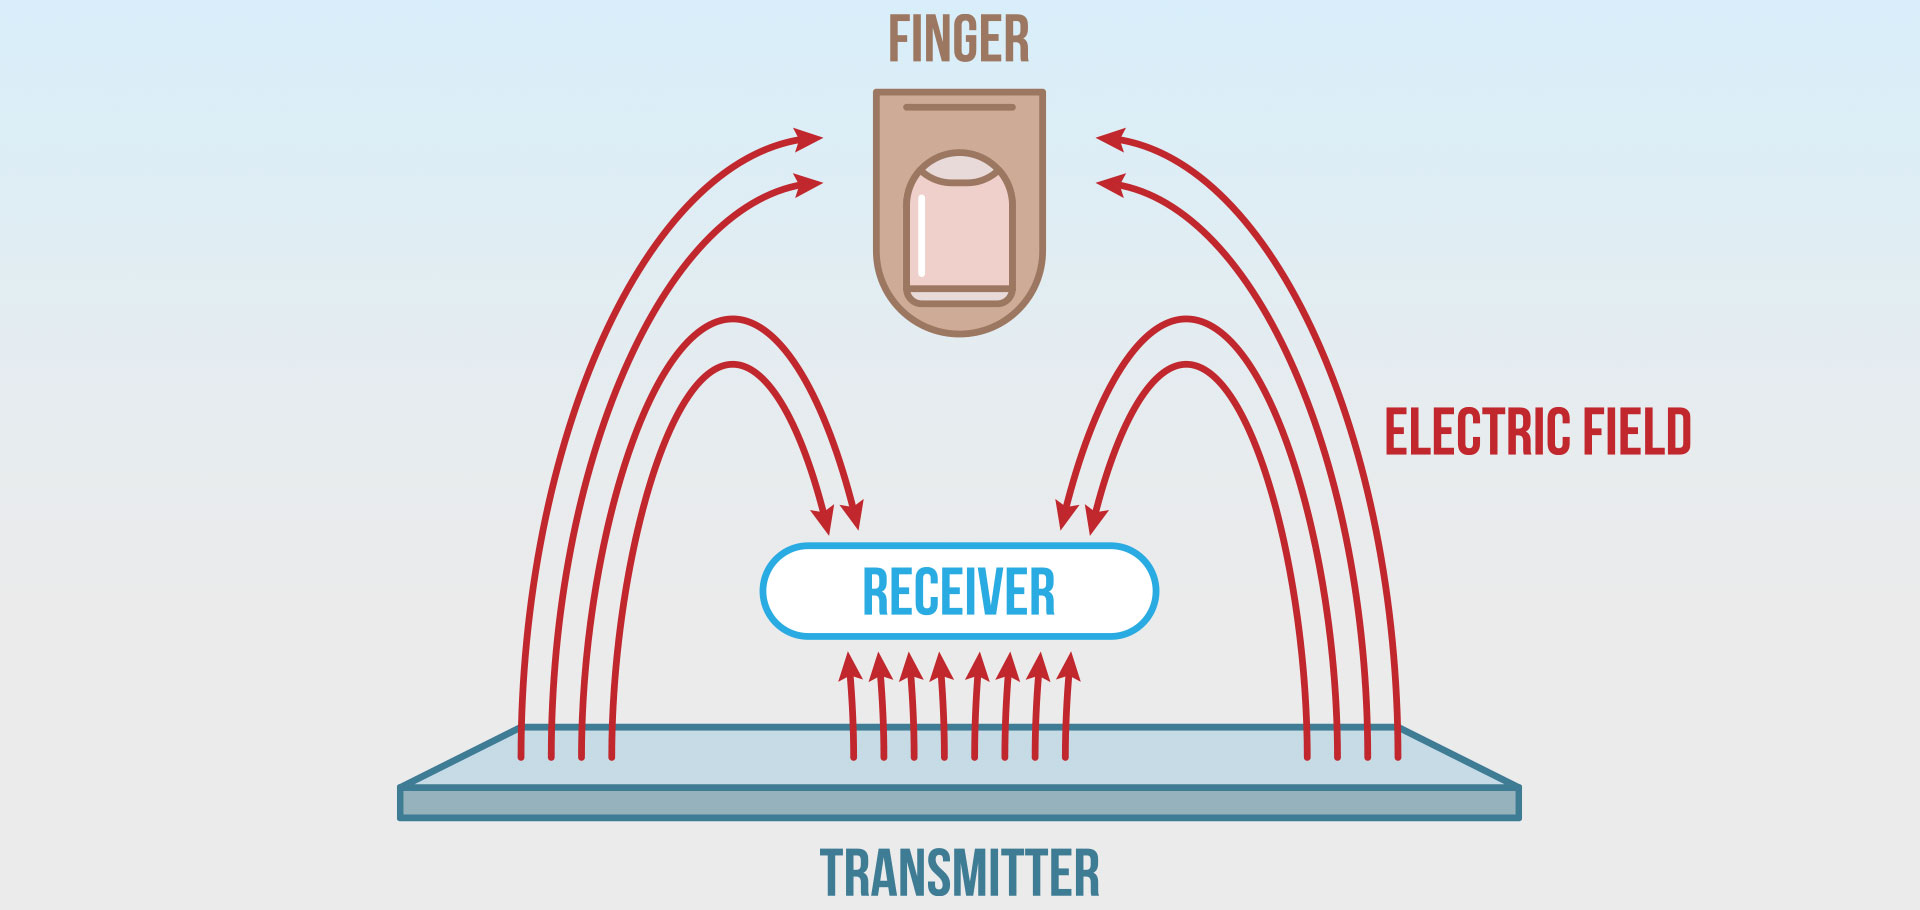 Capacitive Touch Sensing Technology Overview | Synaptics